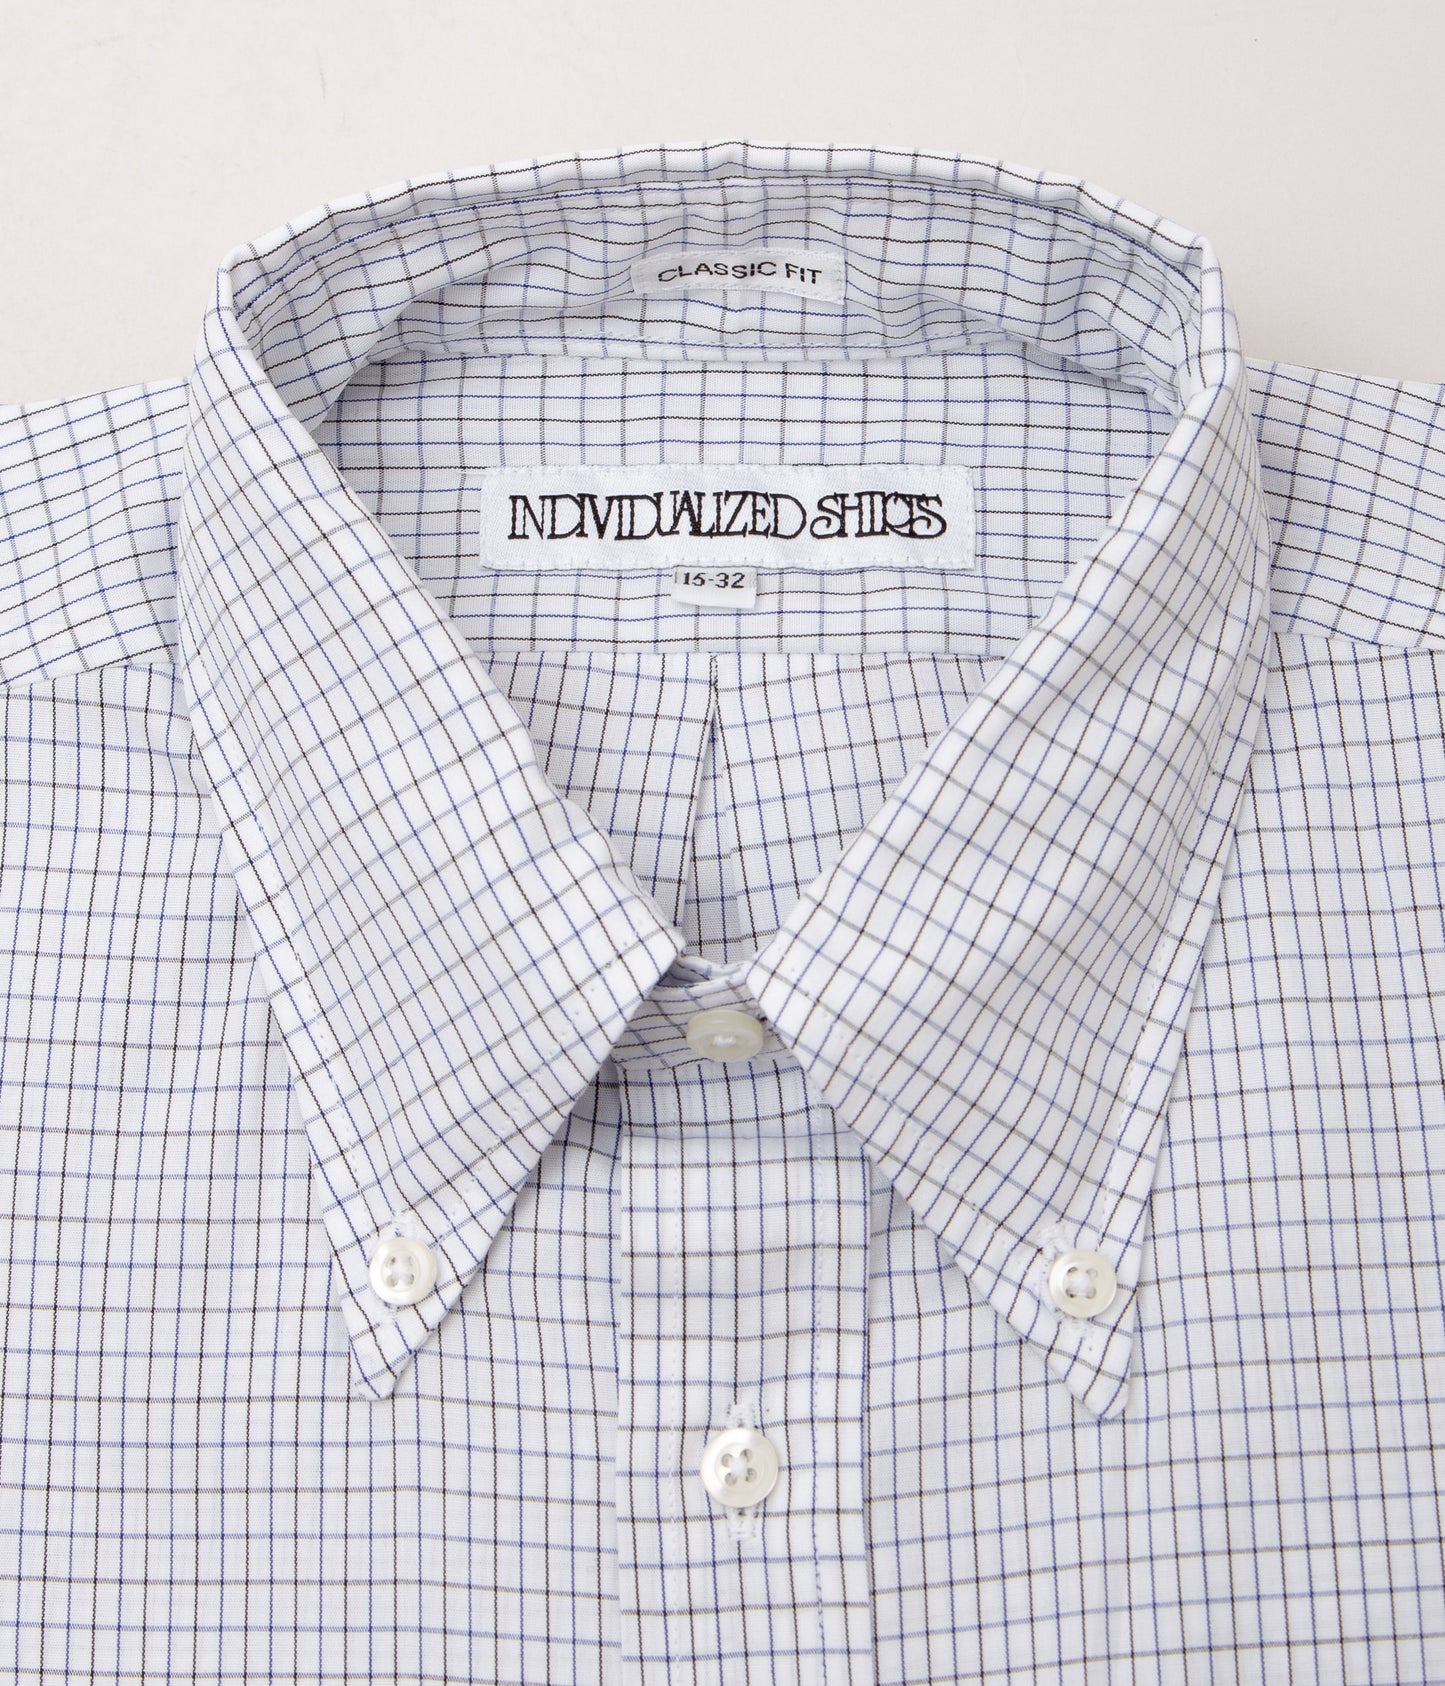 INDIVIDUALIZED SHIRTS "CLASSIC TATTERSALL (CLASSIC FIT BUTTON DOWN SHIRT)	"(BLUE/BLACK)